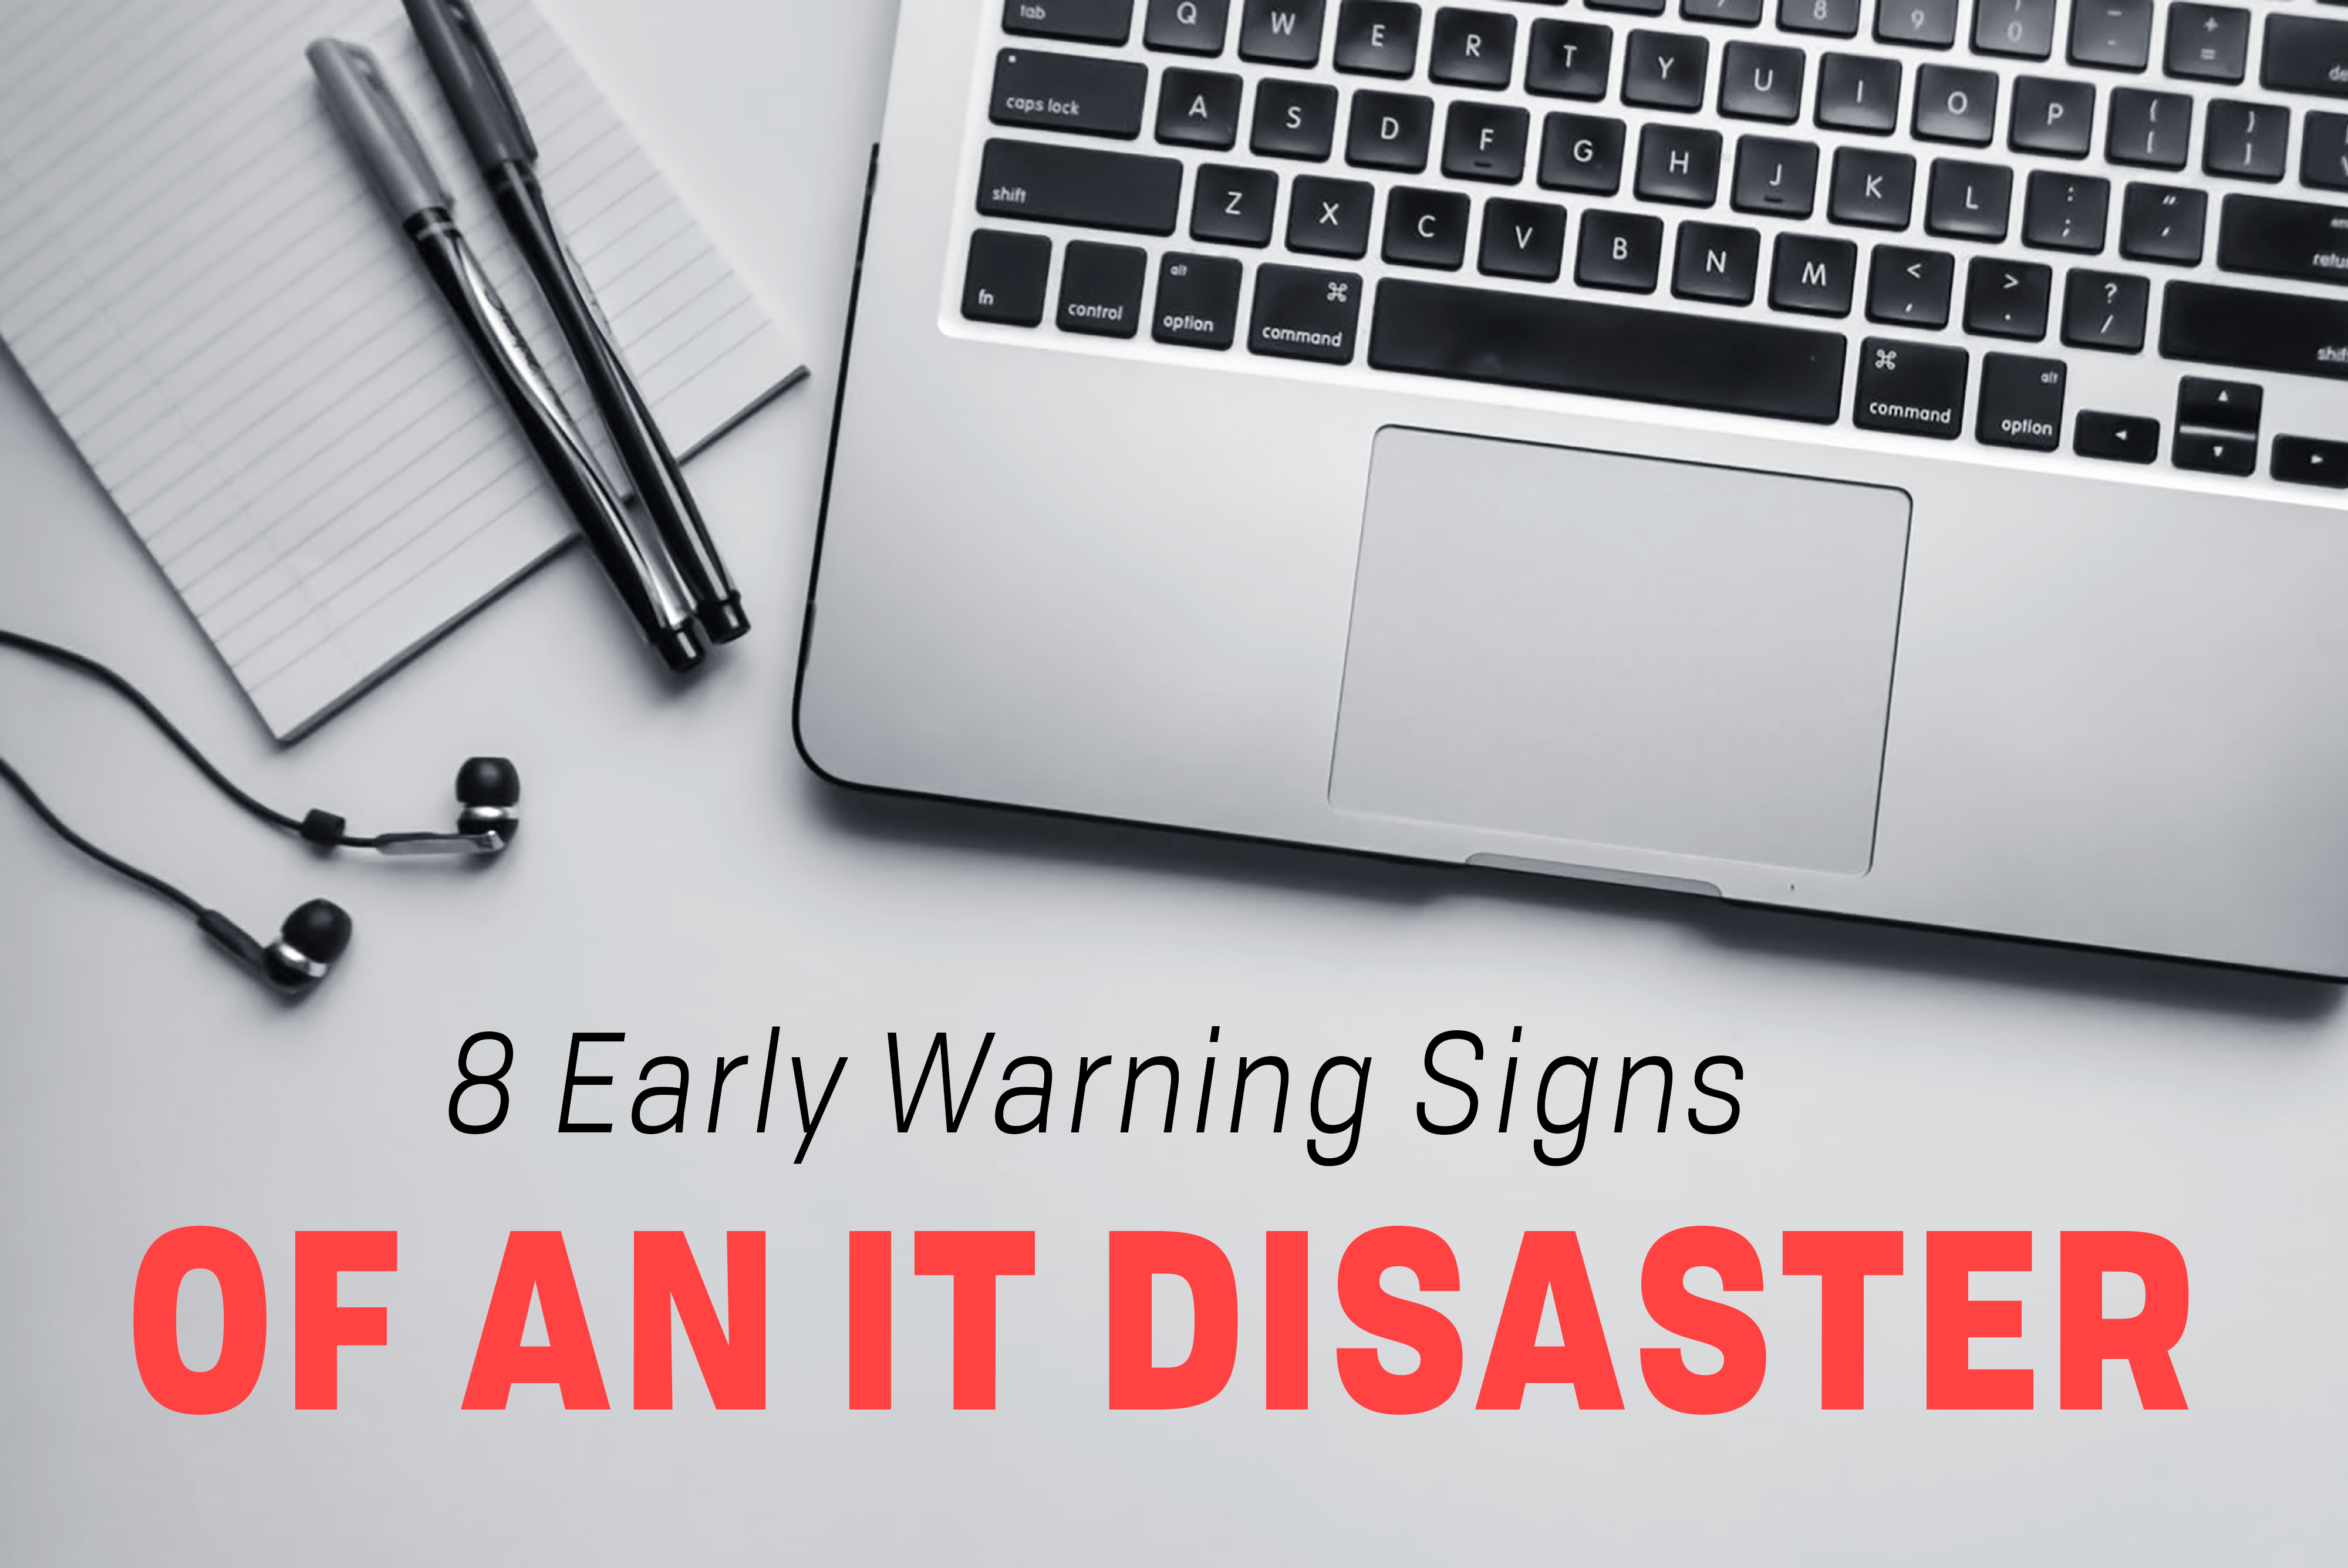 You are currently viewing 8 Early Warning Signs of an IT Disaster